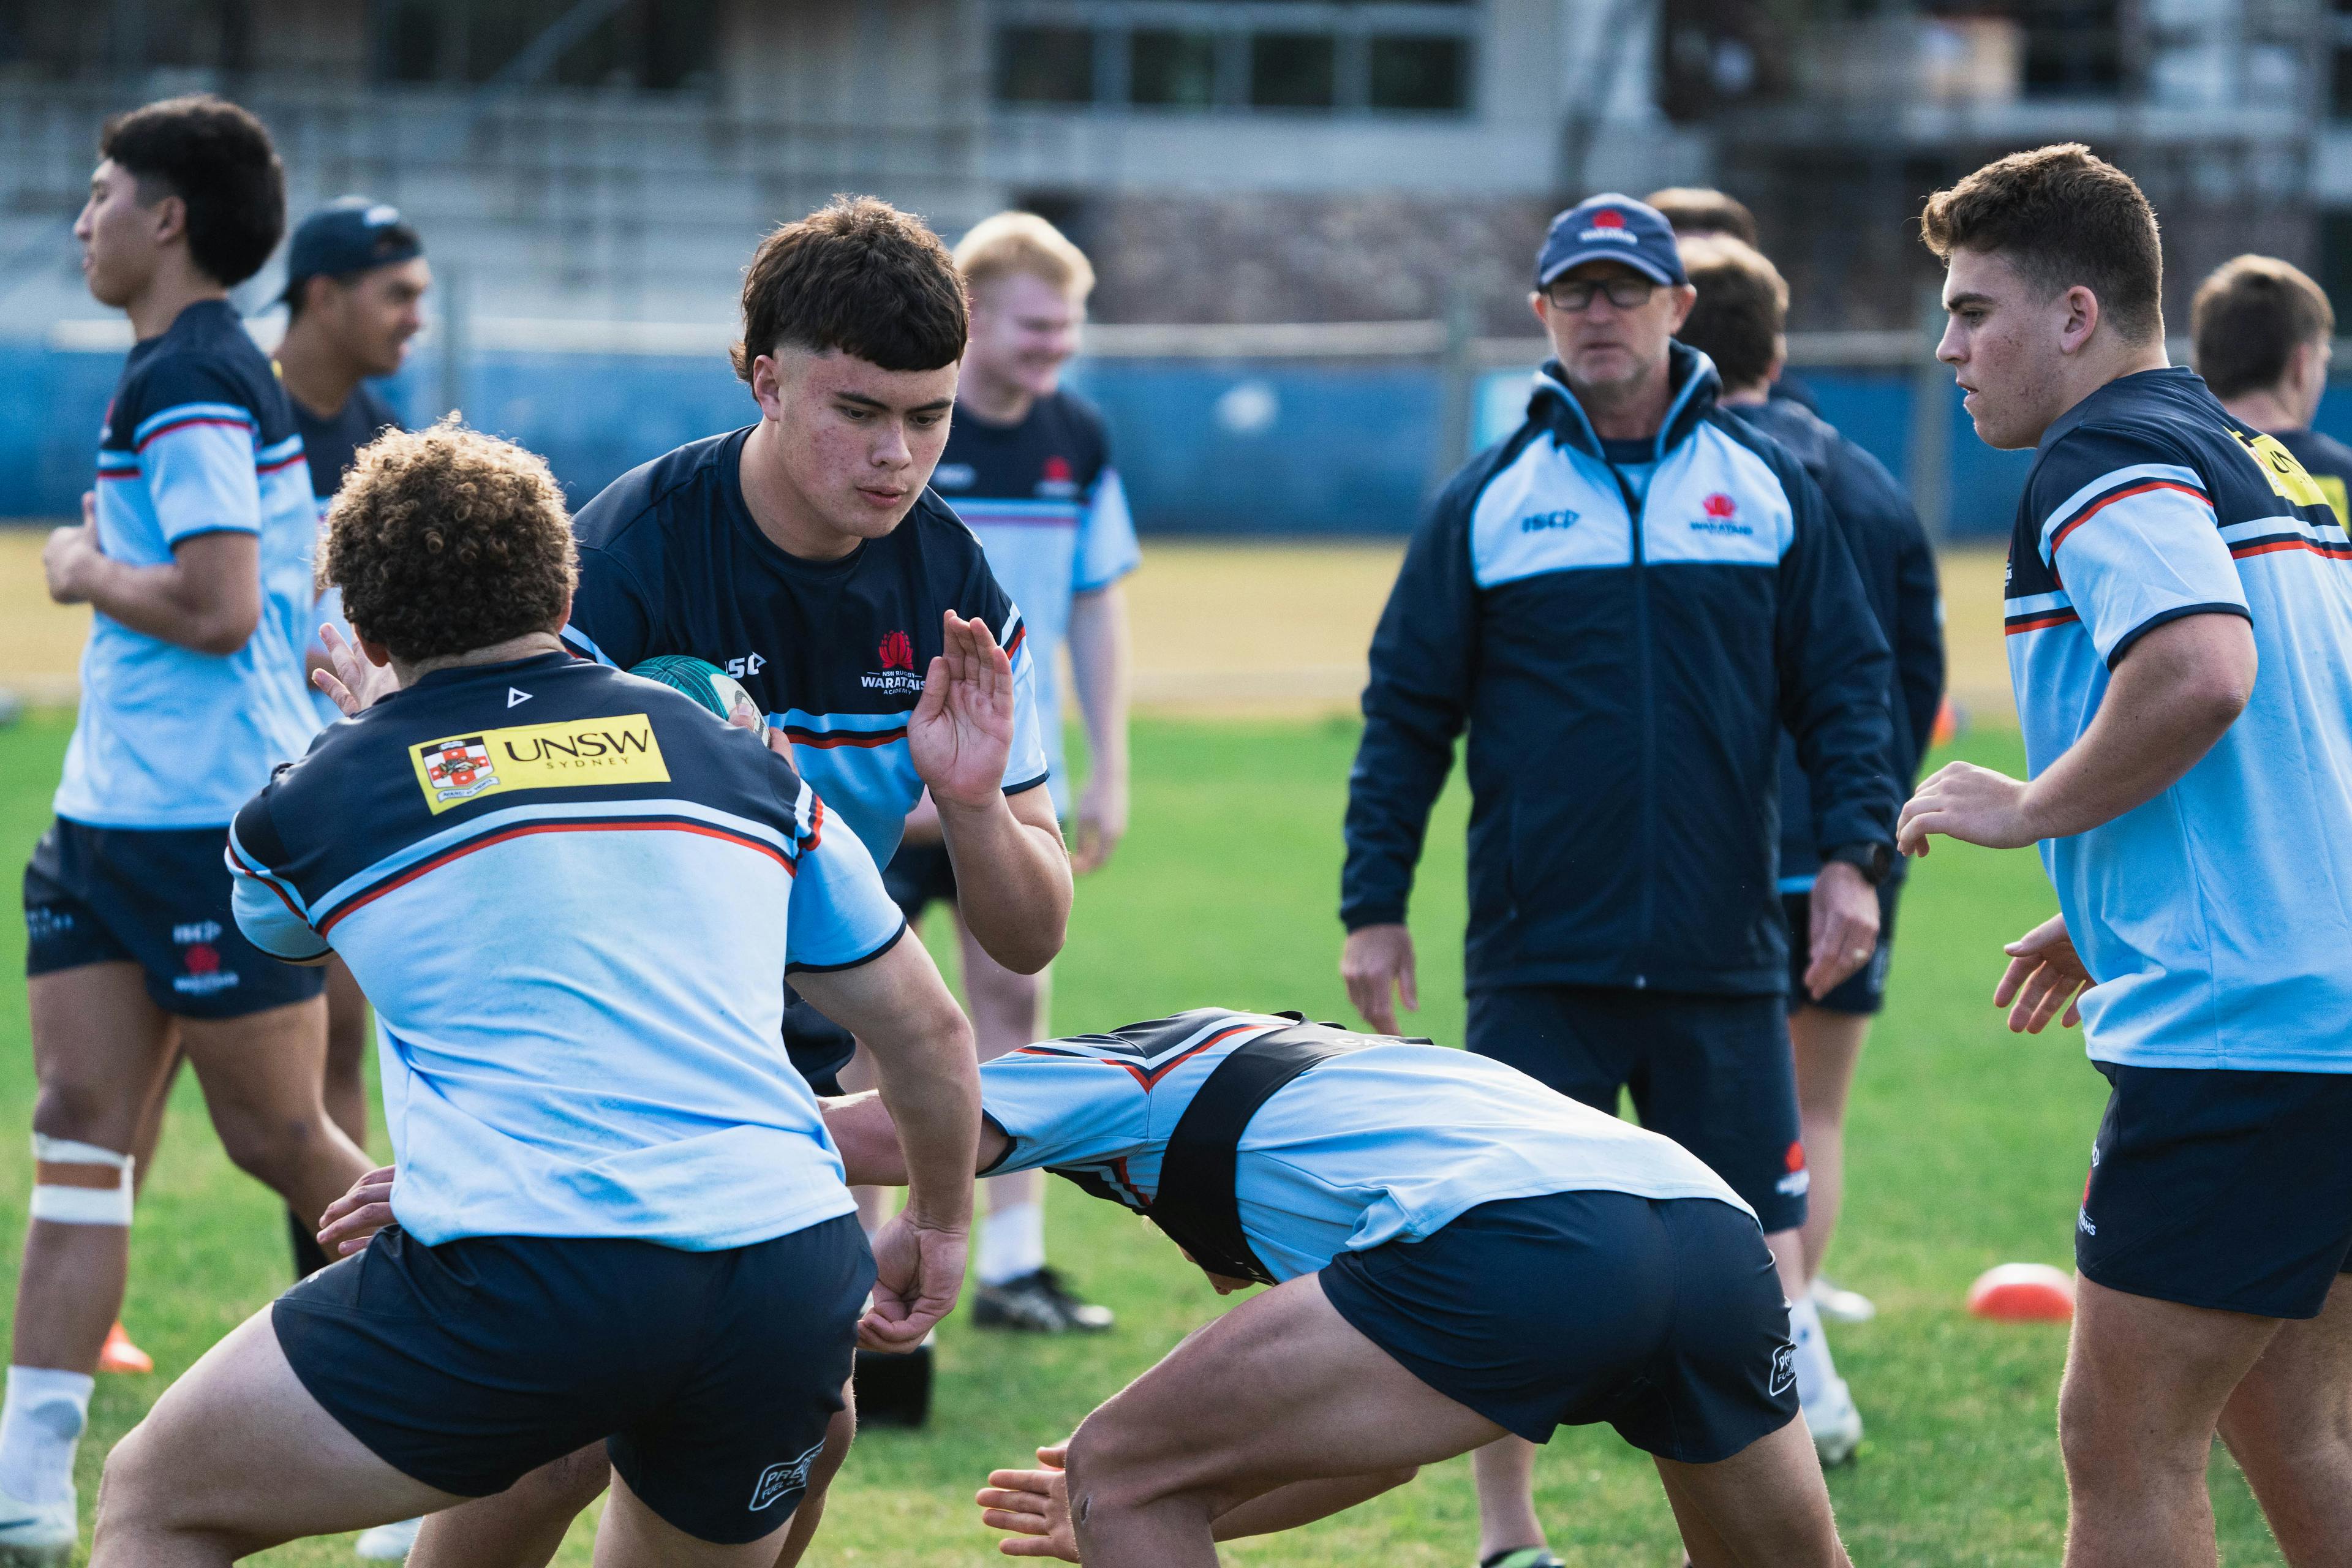 The NSW U18's teams have been confirmed for this weekend's clash against Queensland